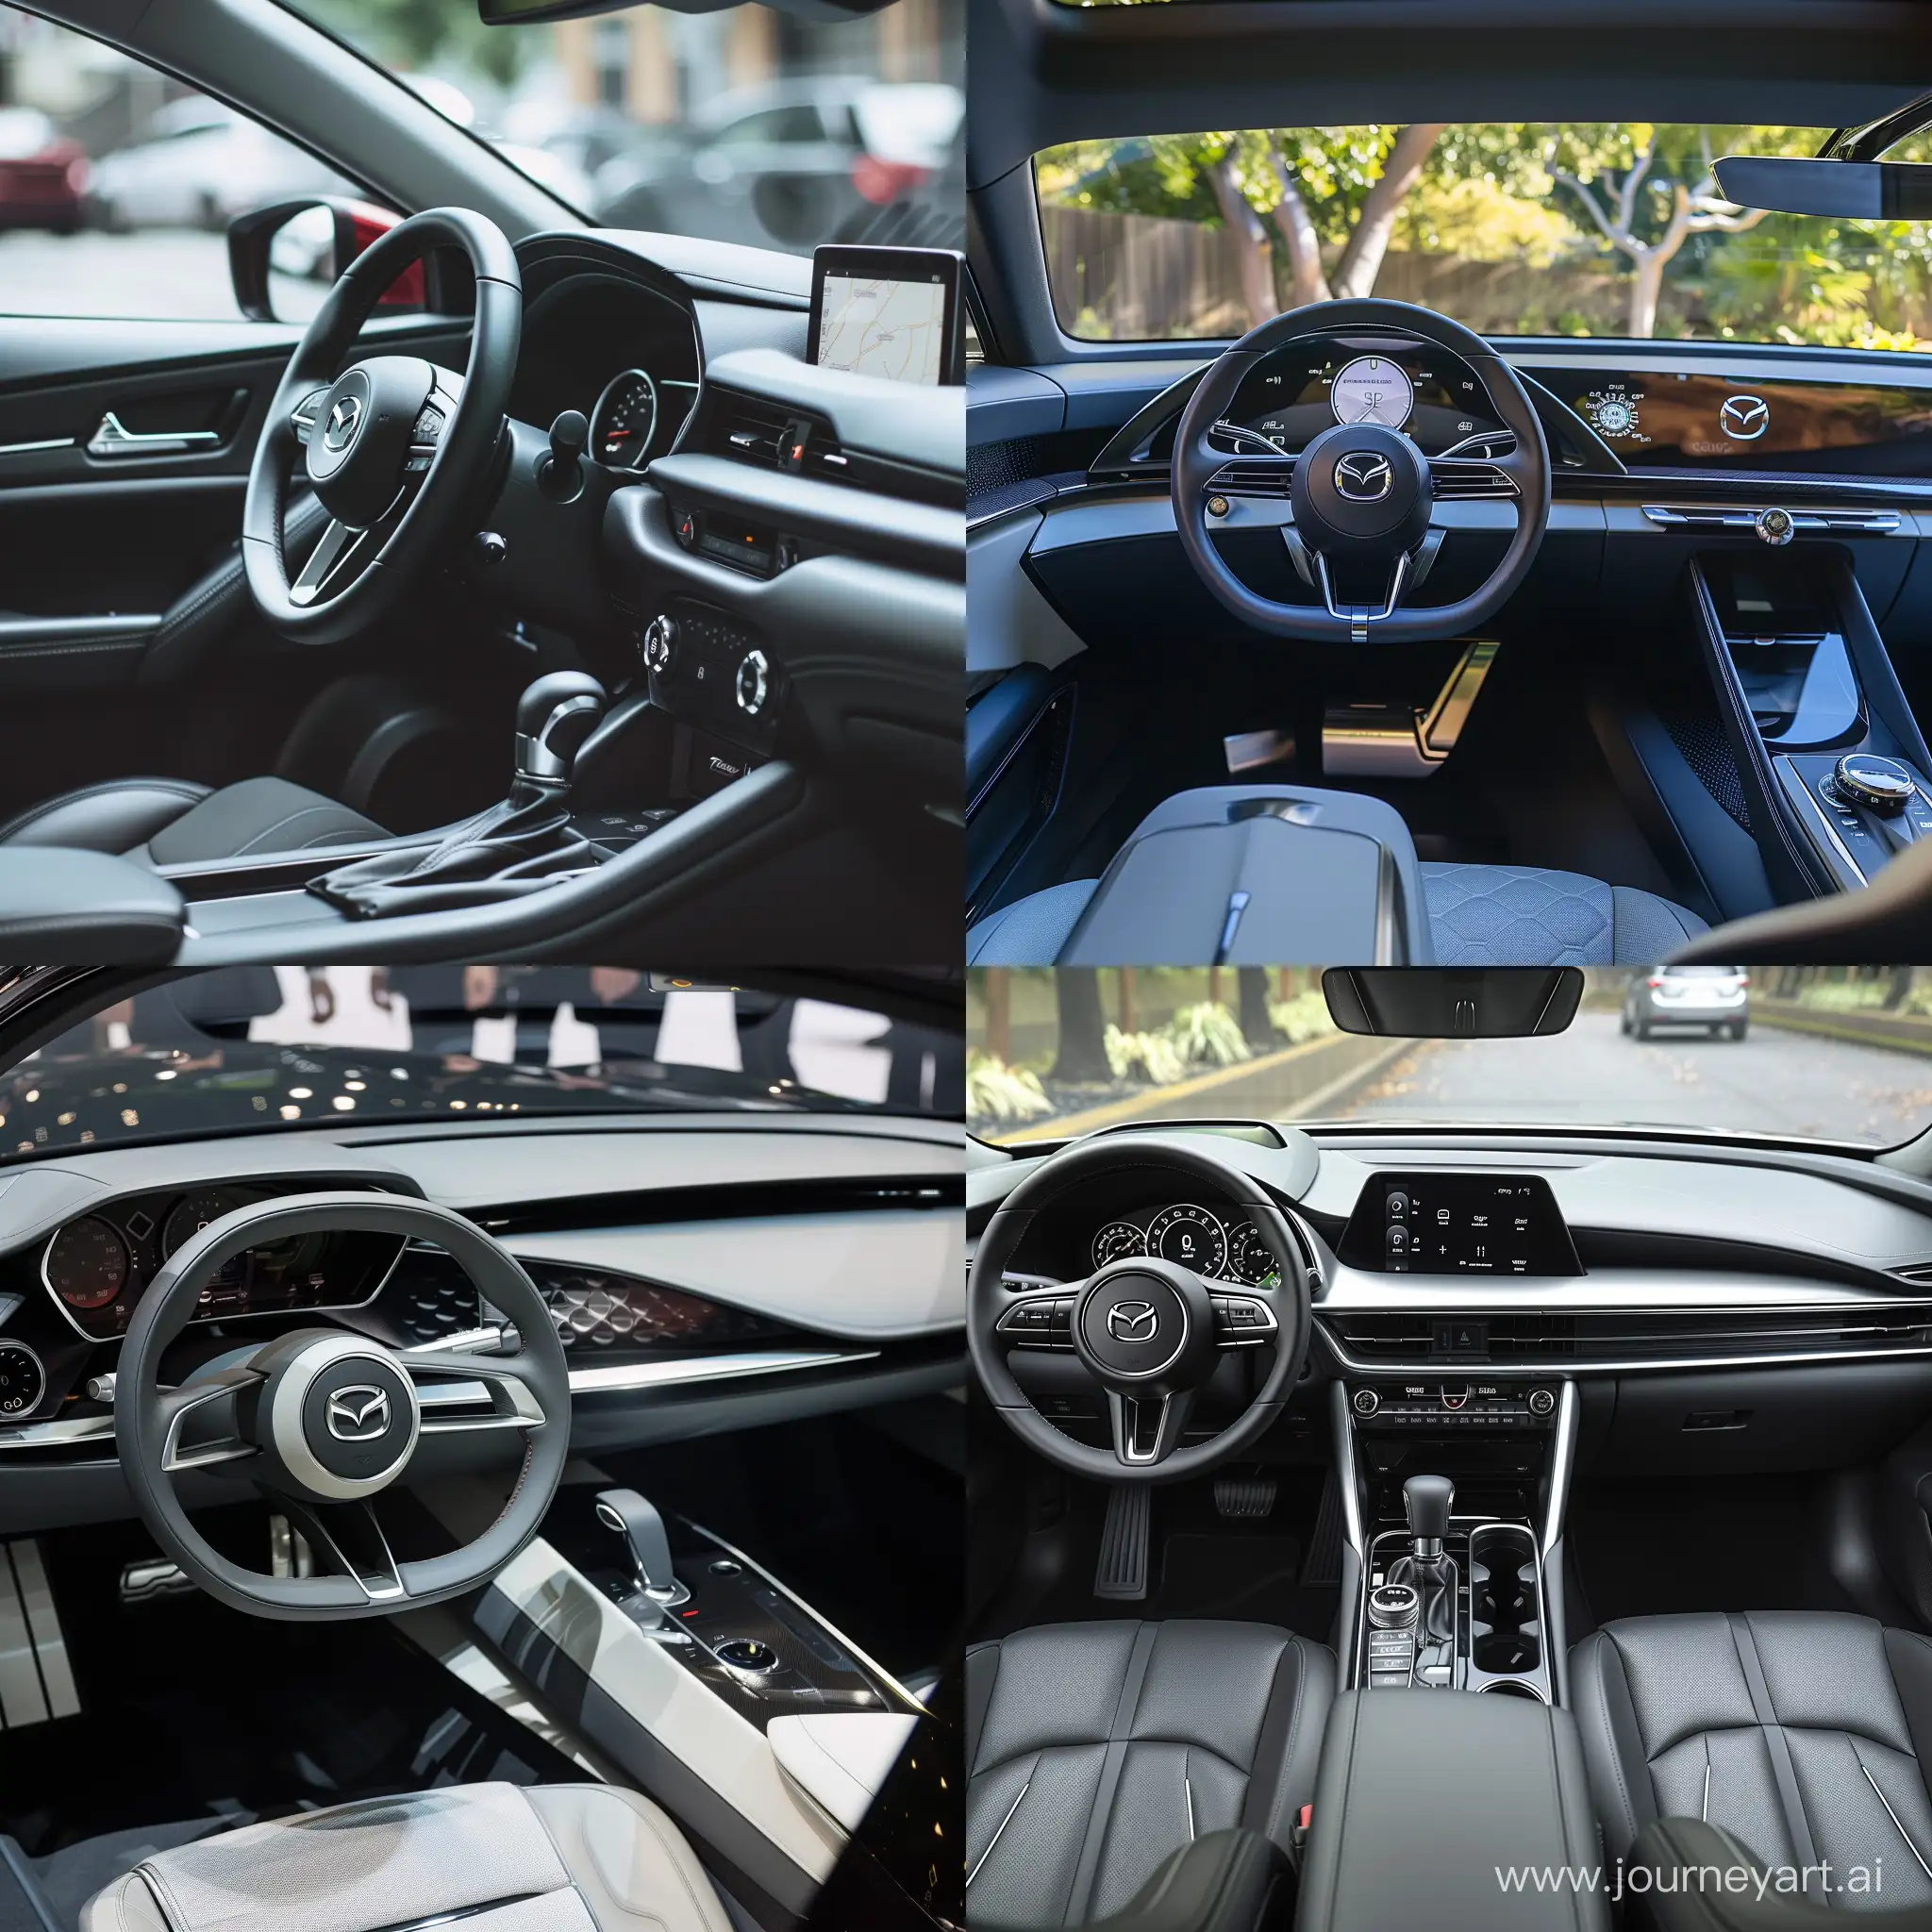 Modern-Car-Interior-with-MazdaLike-Features